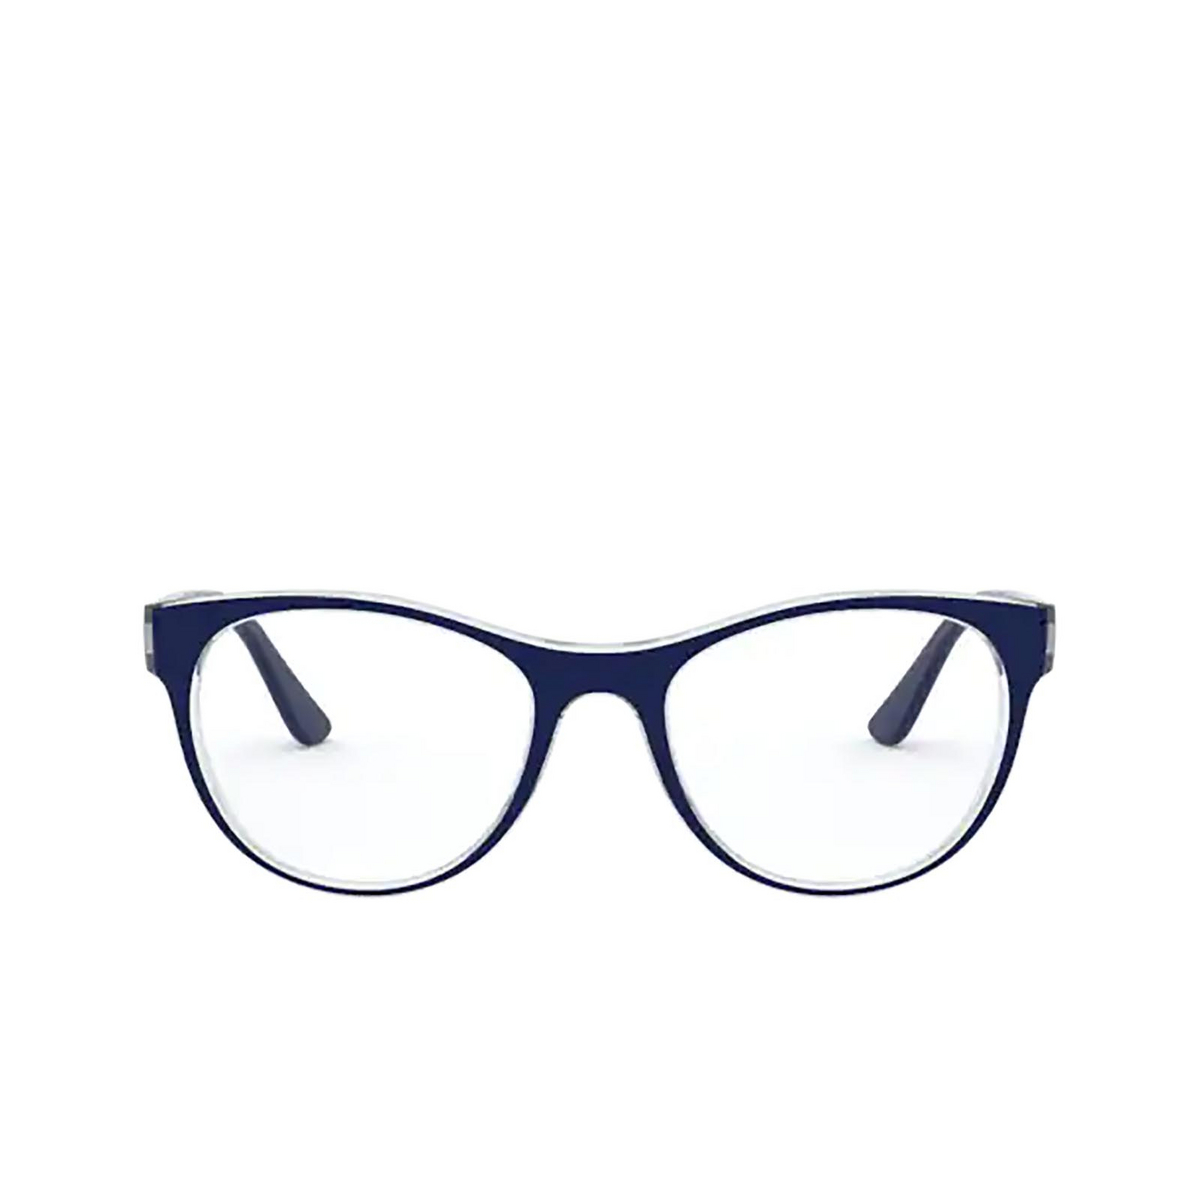 Vogue VO5336 Eyeglasses 2841 TOP BLUE / SERIGRAPHY - front view